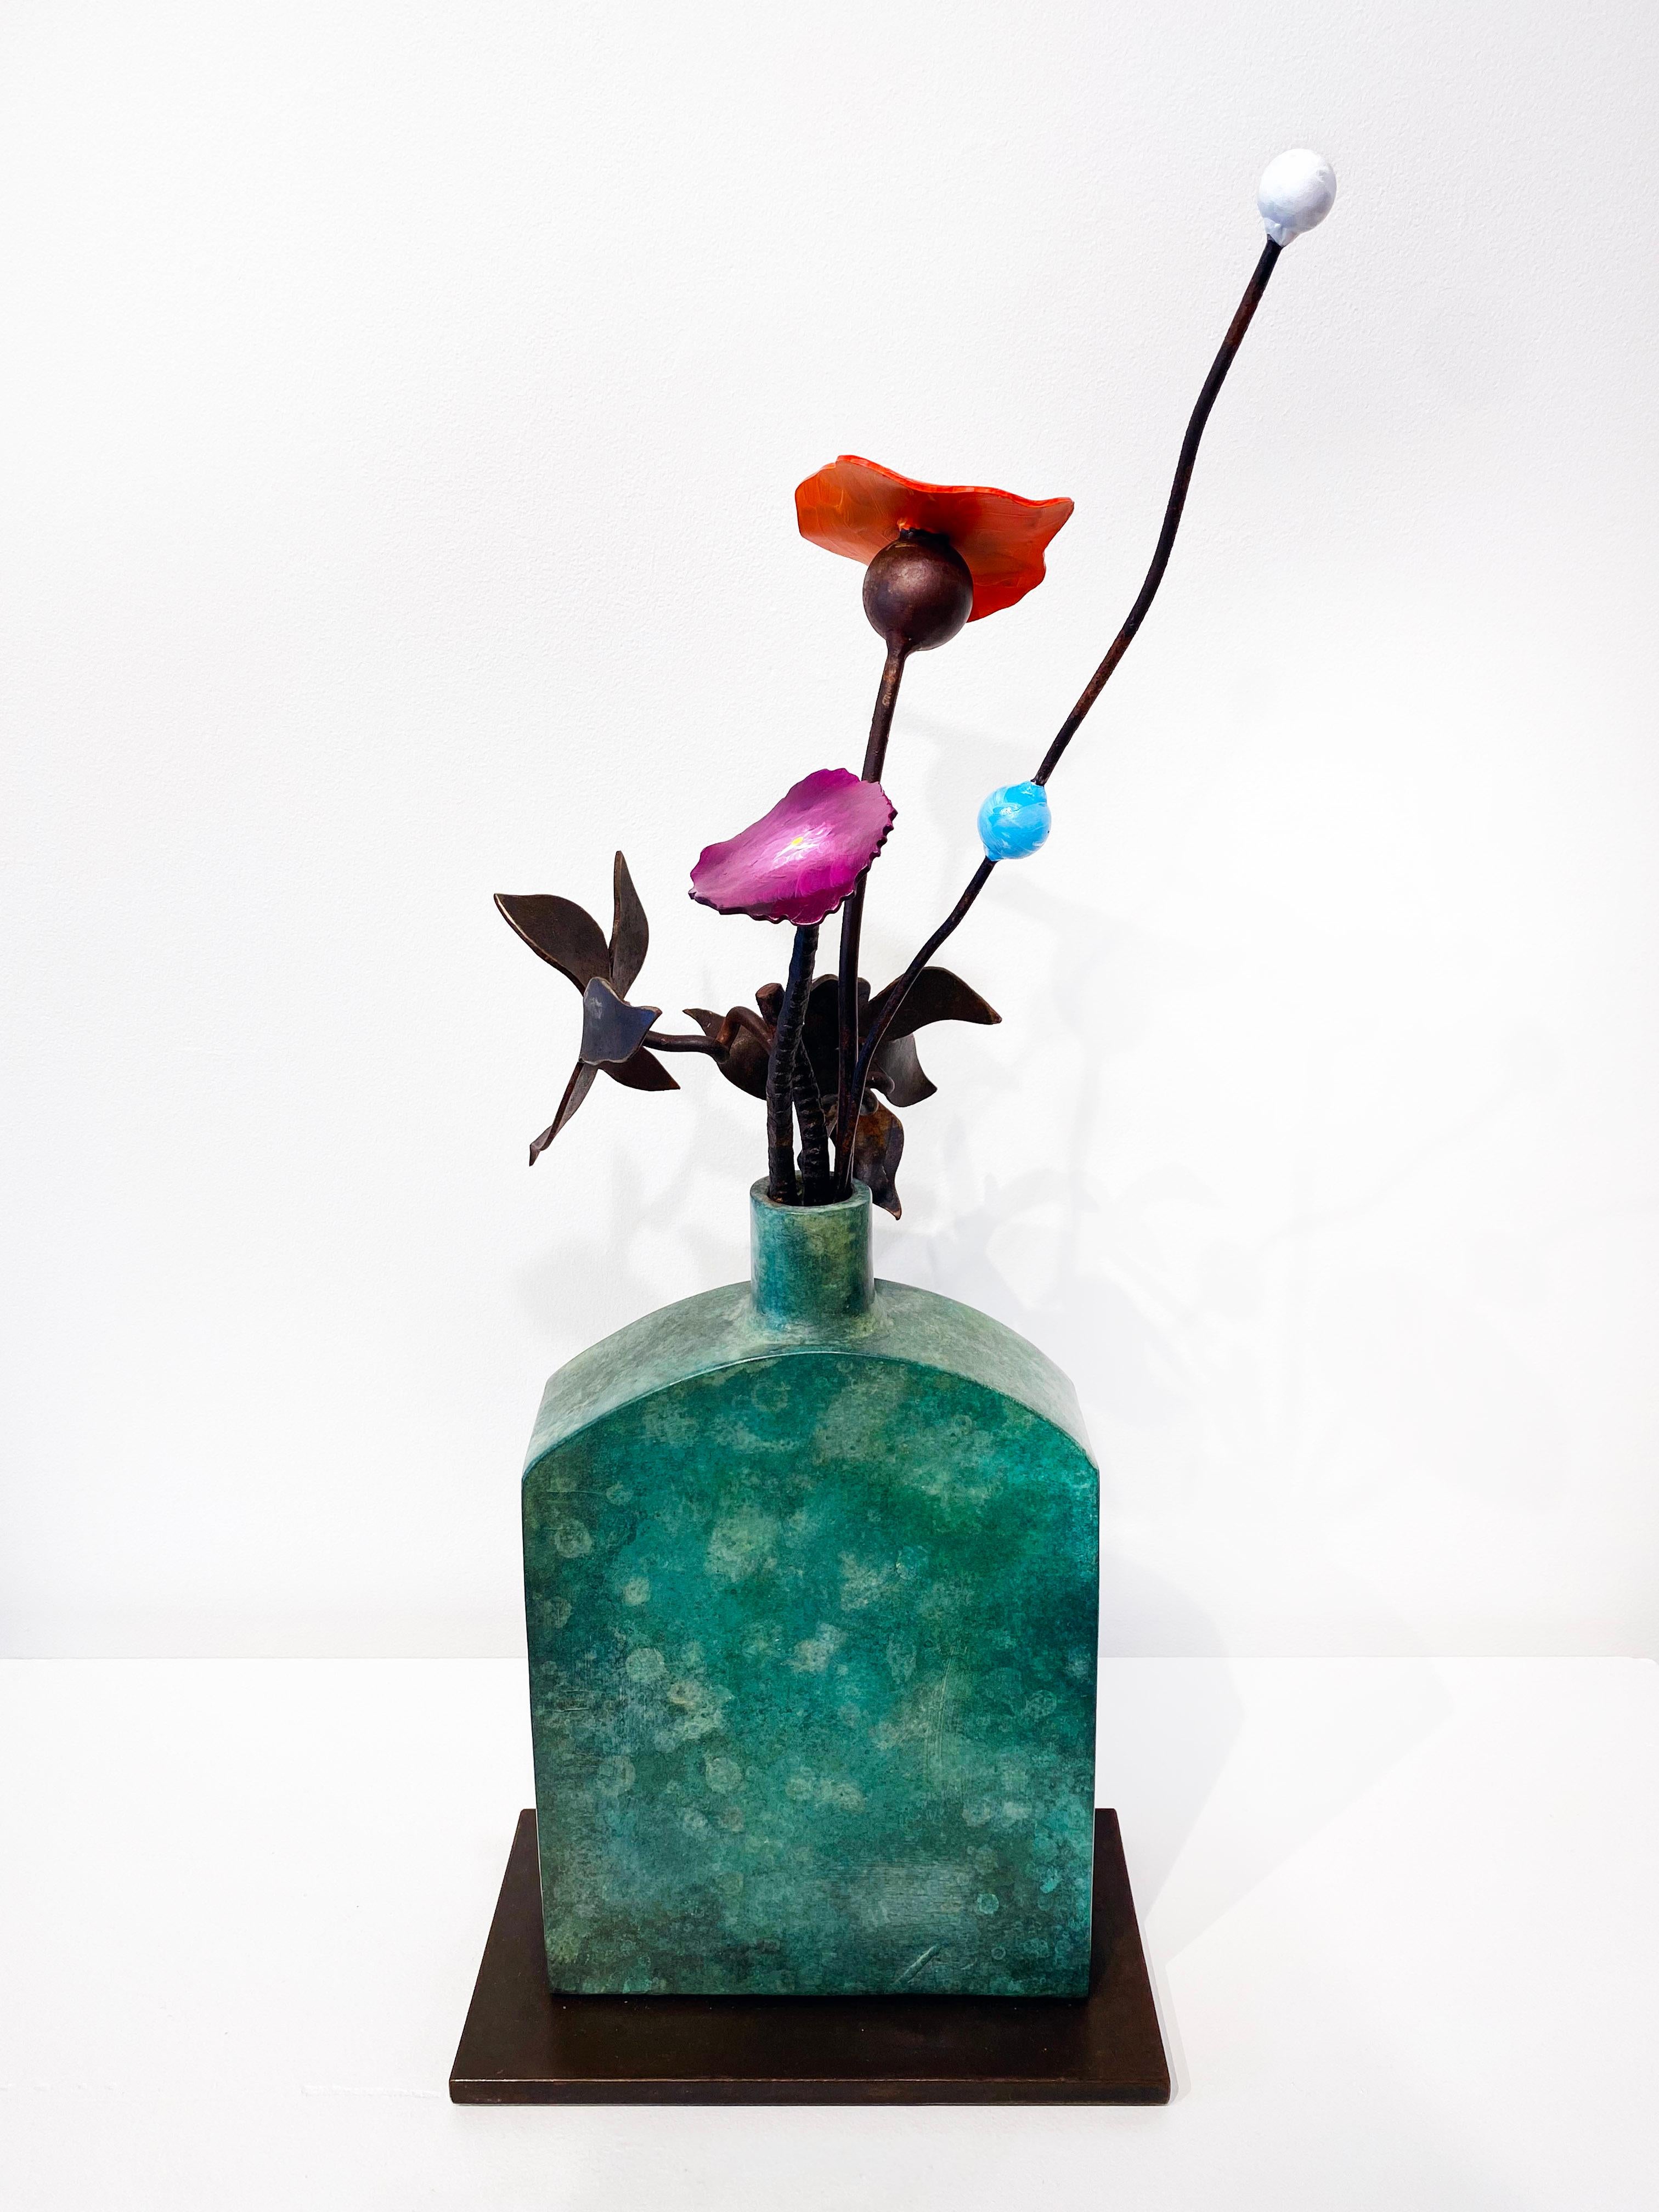 Bronze and Steel Sculpture by David Kimball Anderson 'Green Bottle Summer' 2